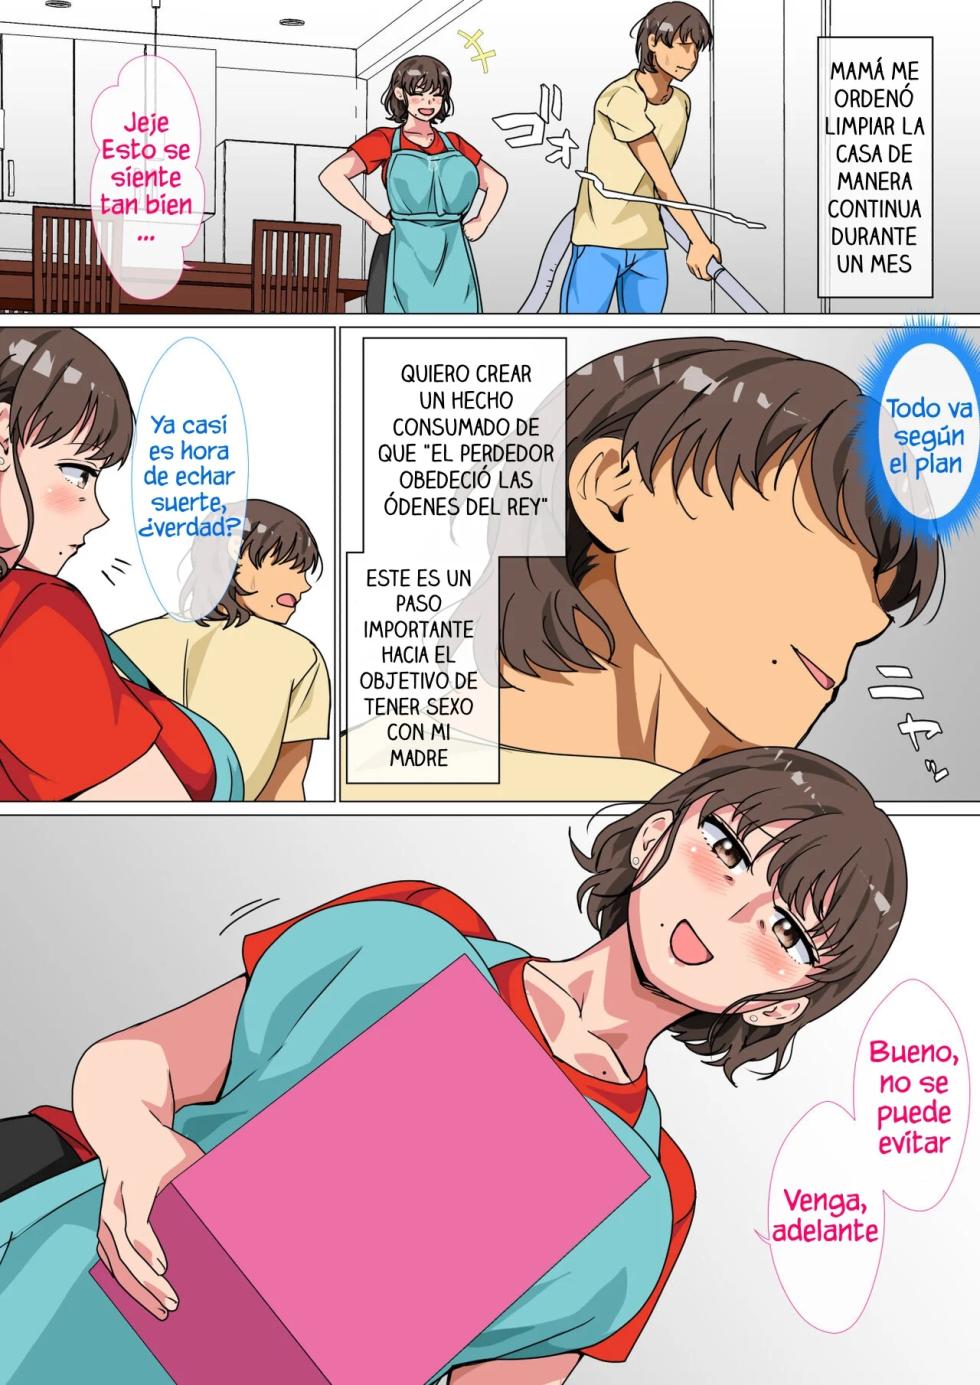 [Circle Spice] Ousama Game no Meirei de Haha to Sex Shita Hanashi | I Ordered My Mom to Have Sex with Me in King's Game [Spanish][PlipPlop] - Page 10